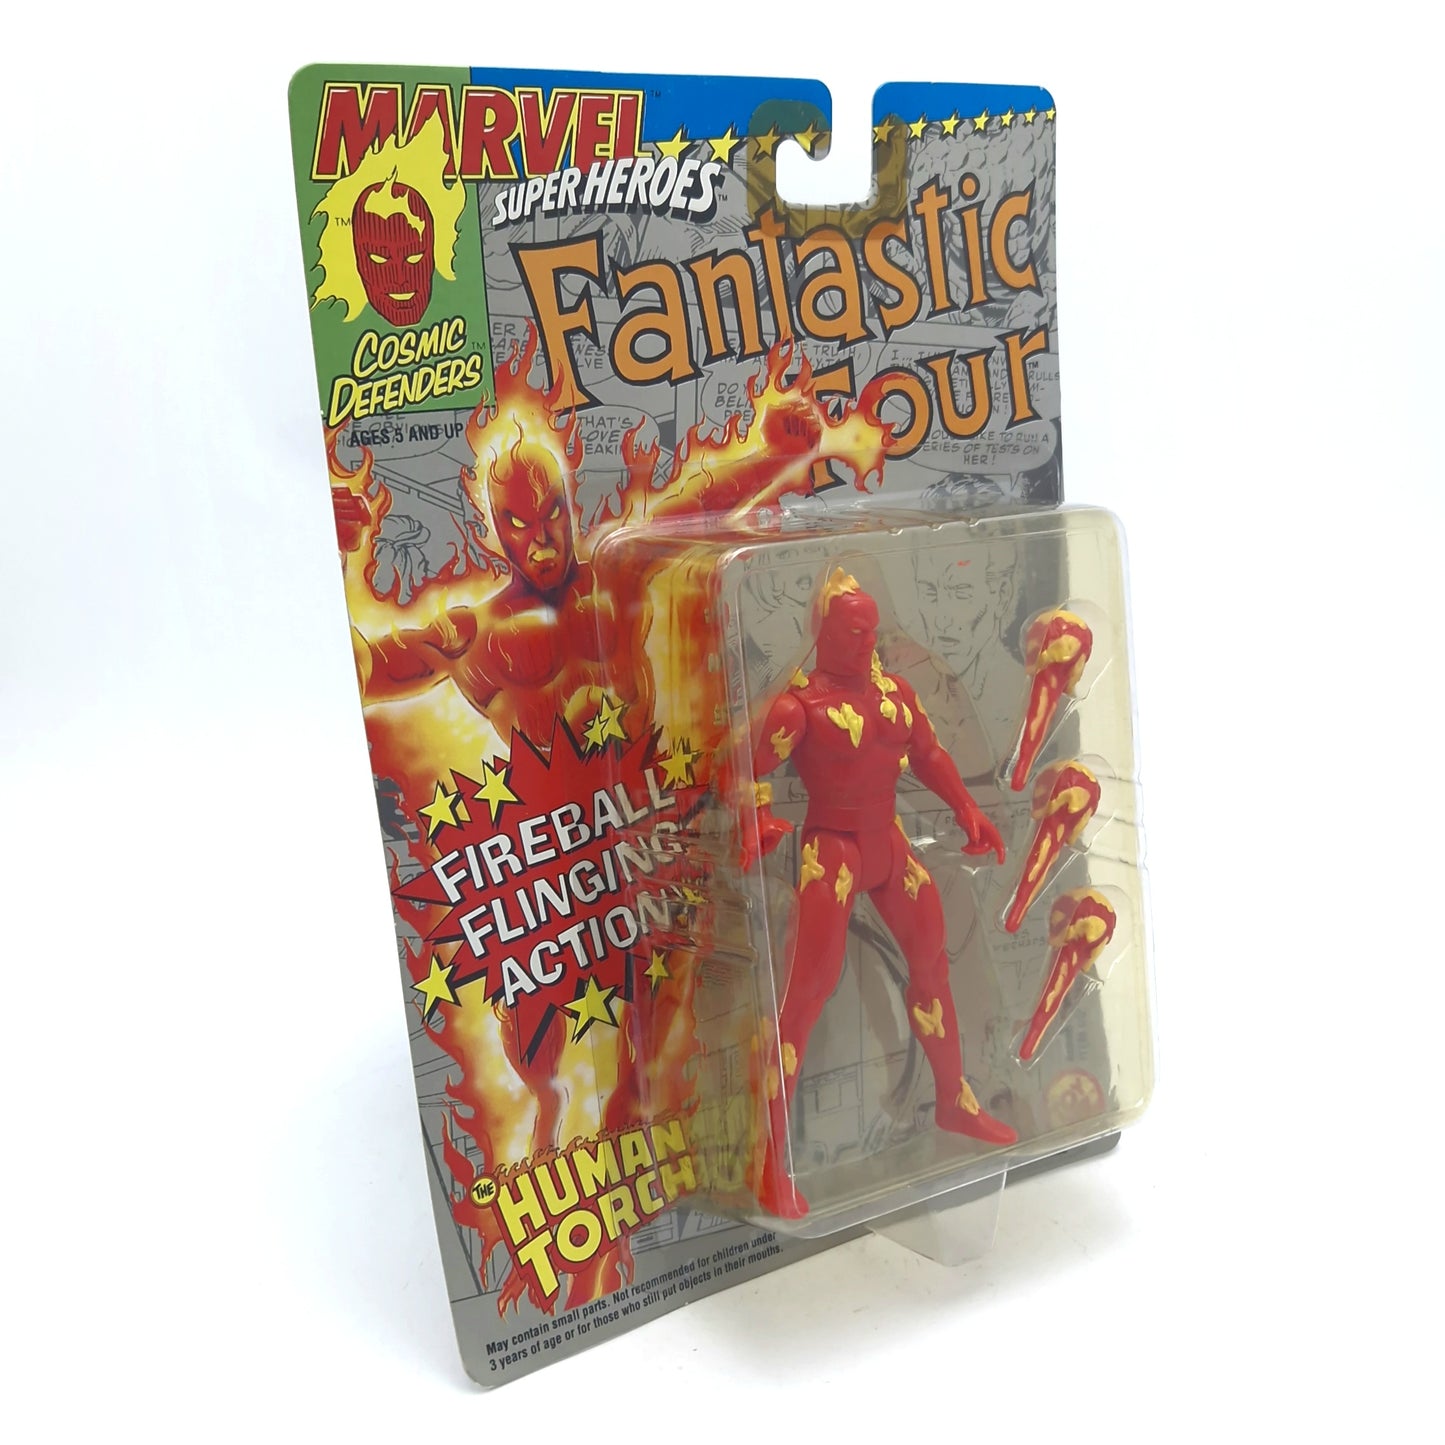 MARVEL SUPERHEROES ☆ FANTASIC FOUR SET THING MR HUMAN TORCH INVISIBLE WOMAN Figure ☆ 90's MOC Sealed Carded Toybiz 90s